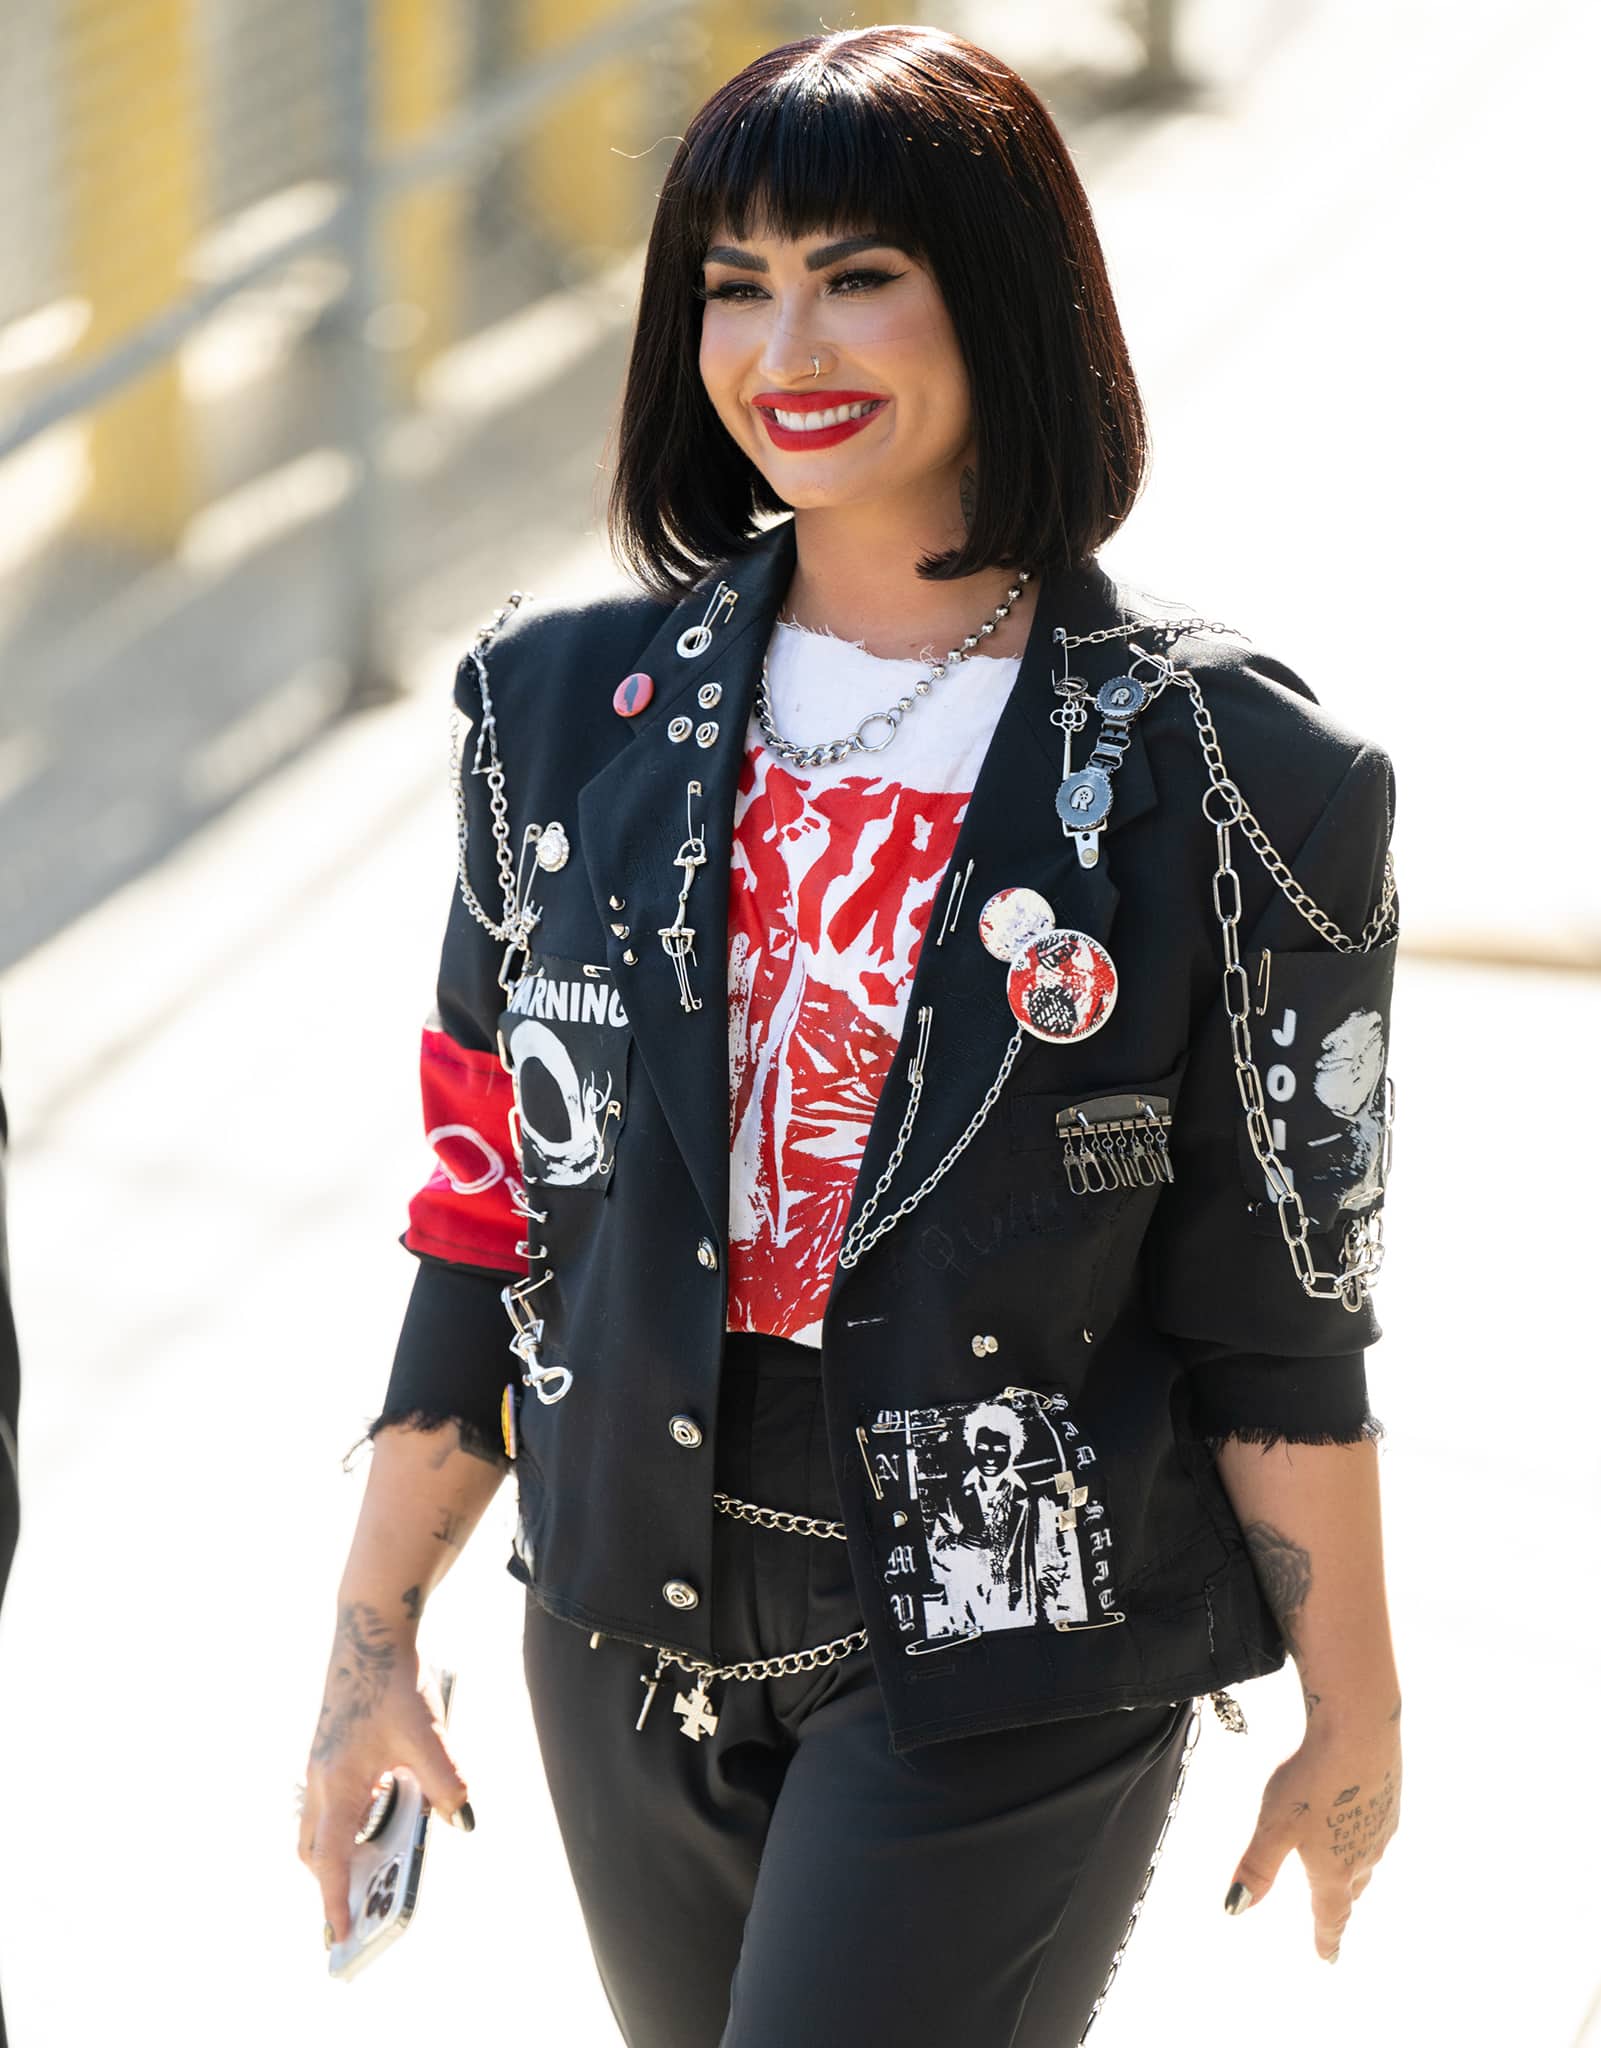 Demi Lovato wears bold red lip color and a wig with blunt bangs, covering her forehead cut